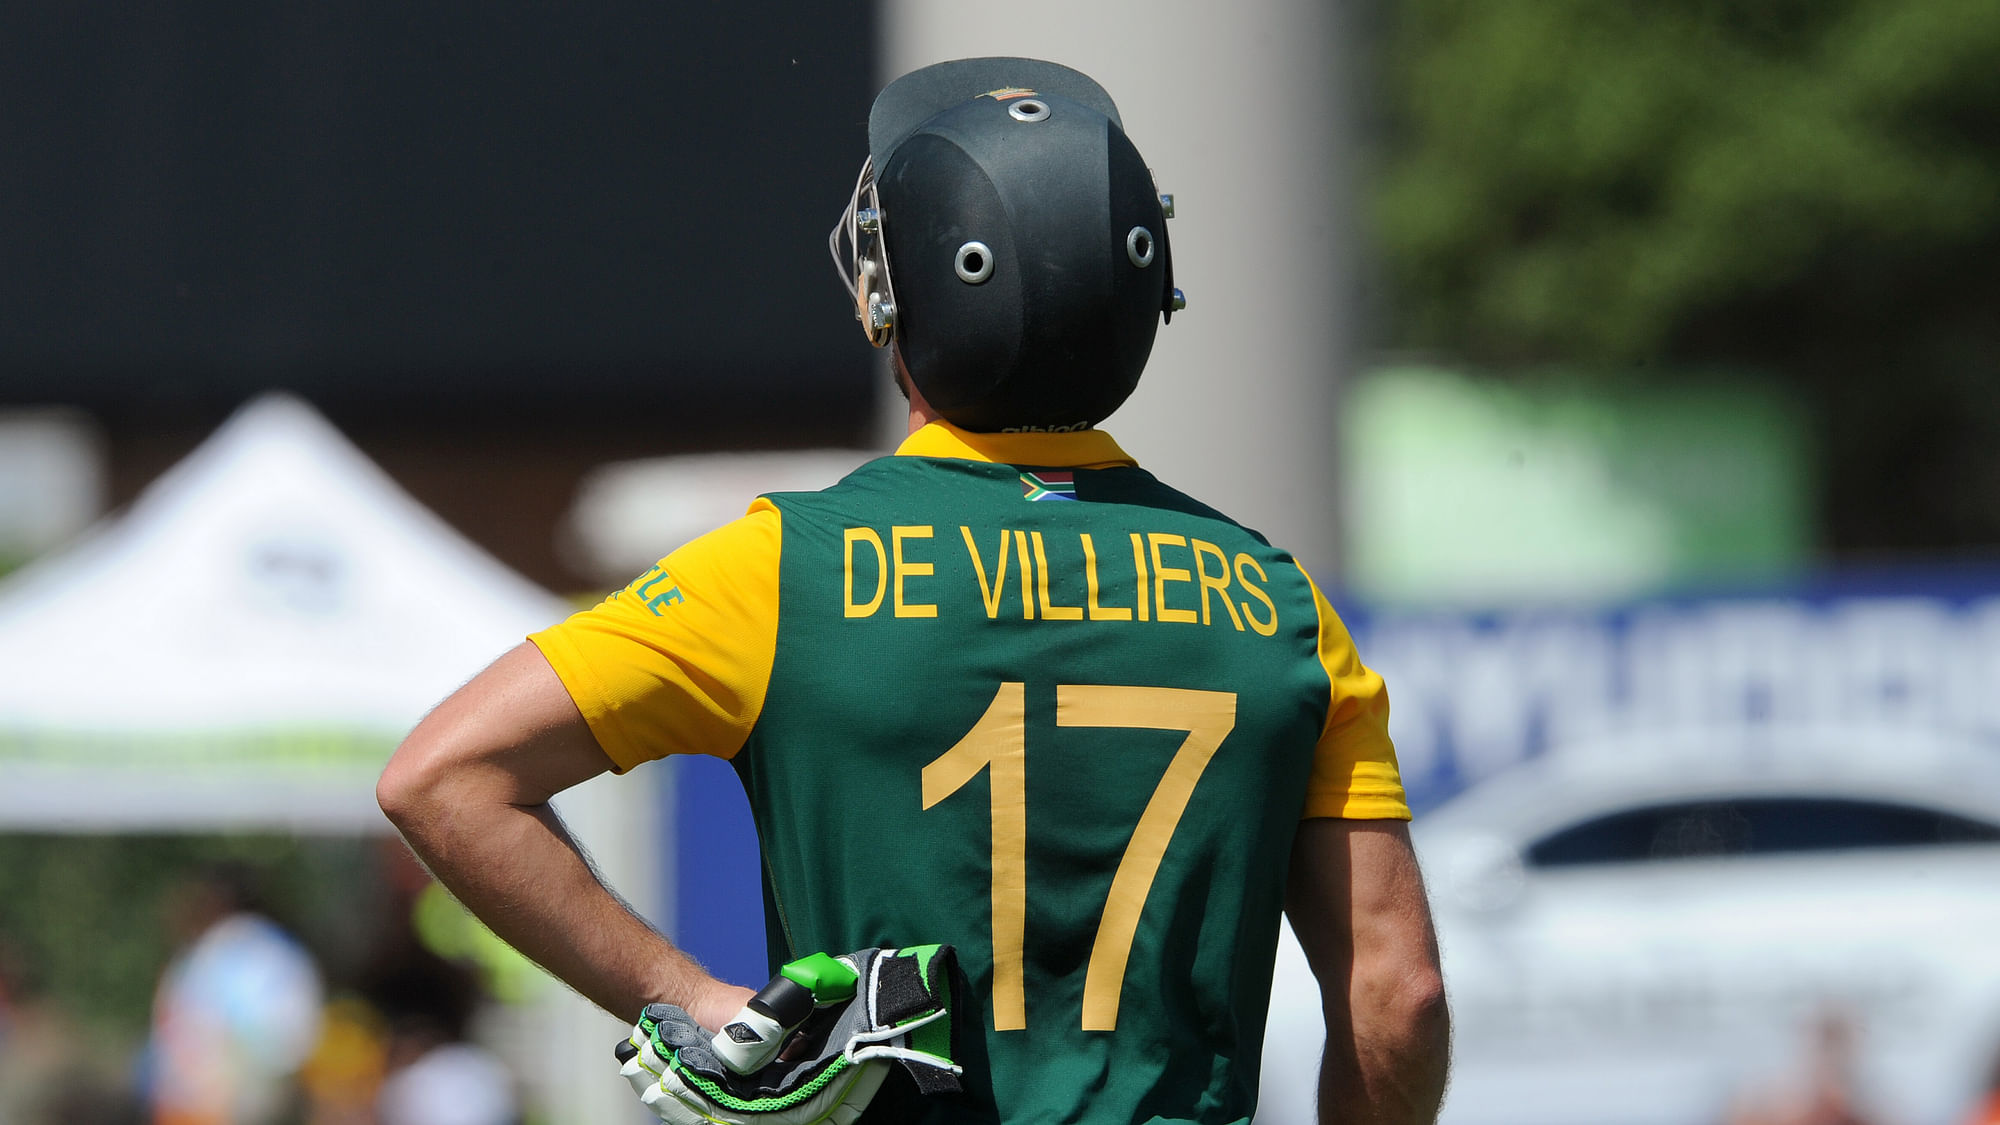 AB de Villiers is returning from an injury for the fourth ODI between India and South Africa.